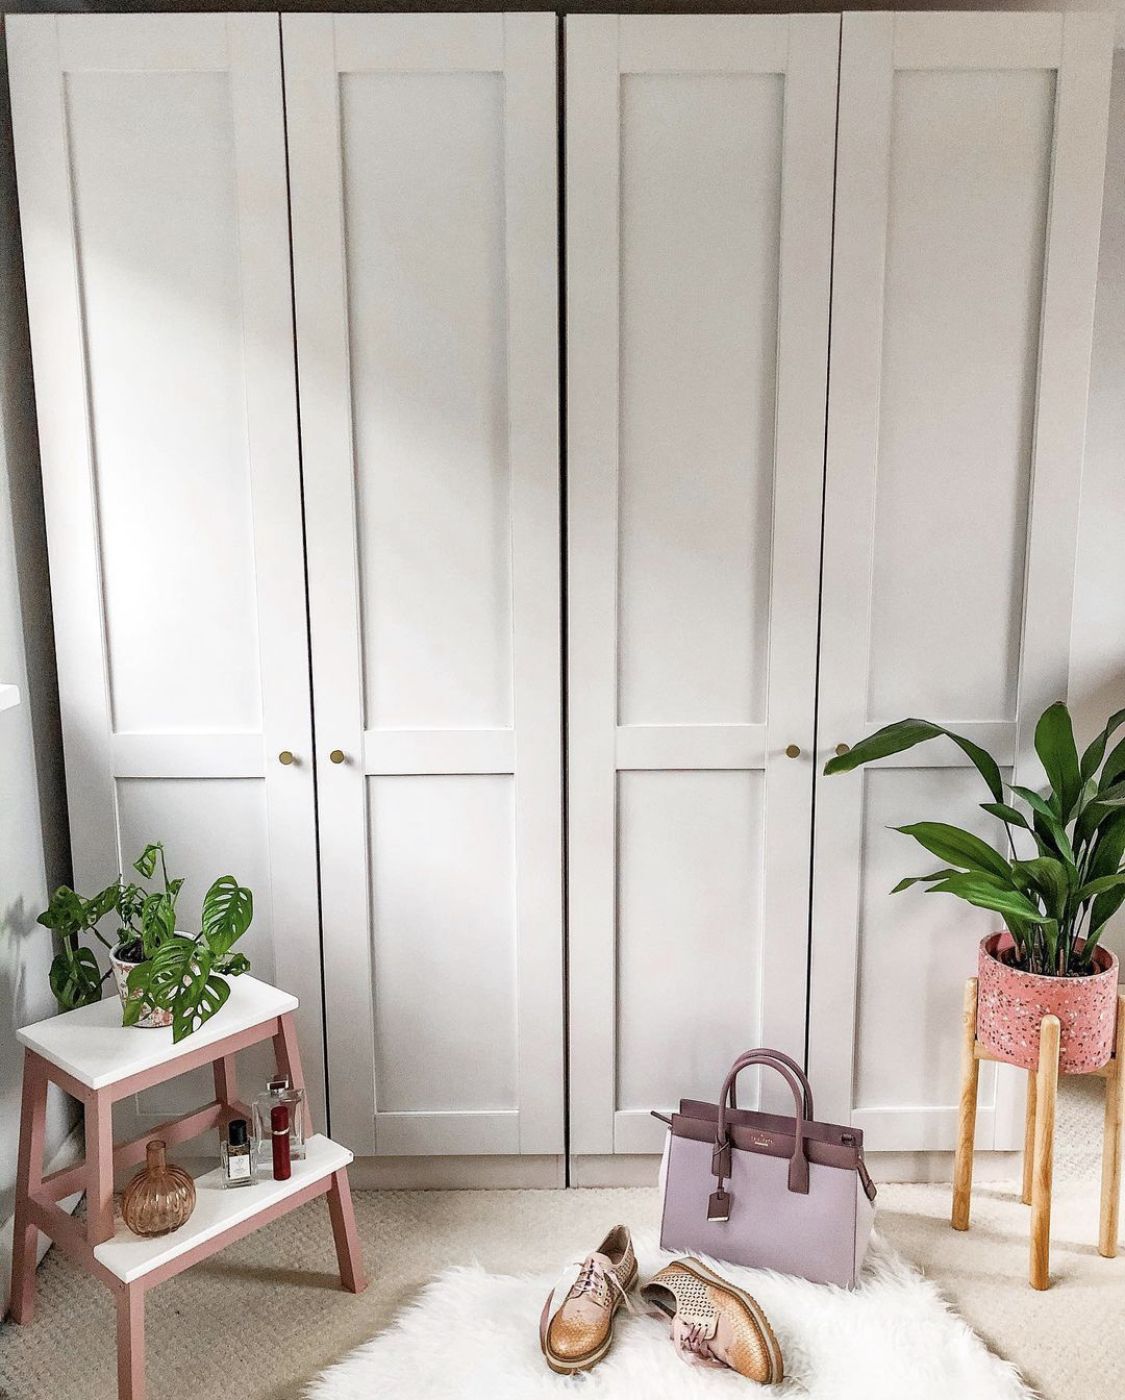 Our Budget Wardrobe Makeover For Under £35! – Boo & Maddie Within Farrow And Ball Painted Wardrobes (View 13 of 15)